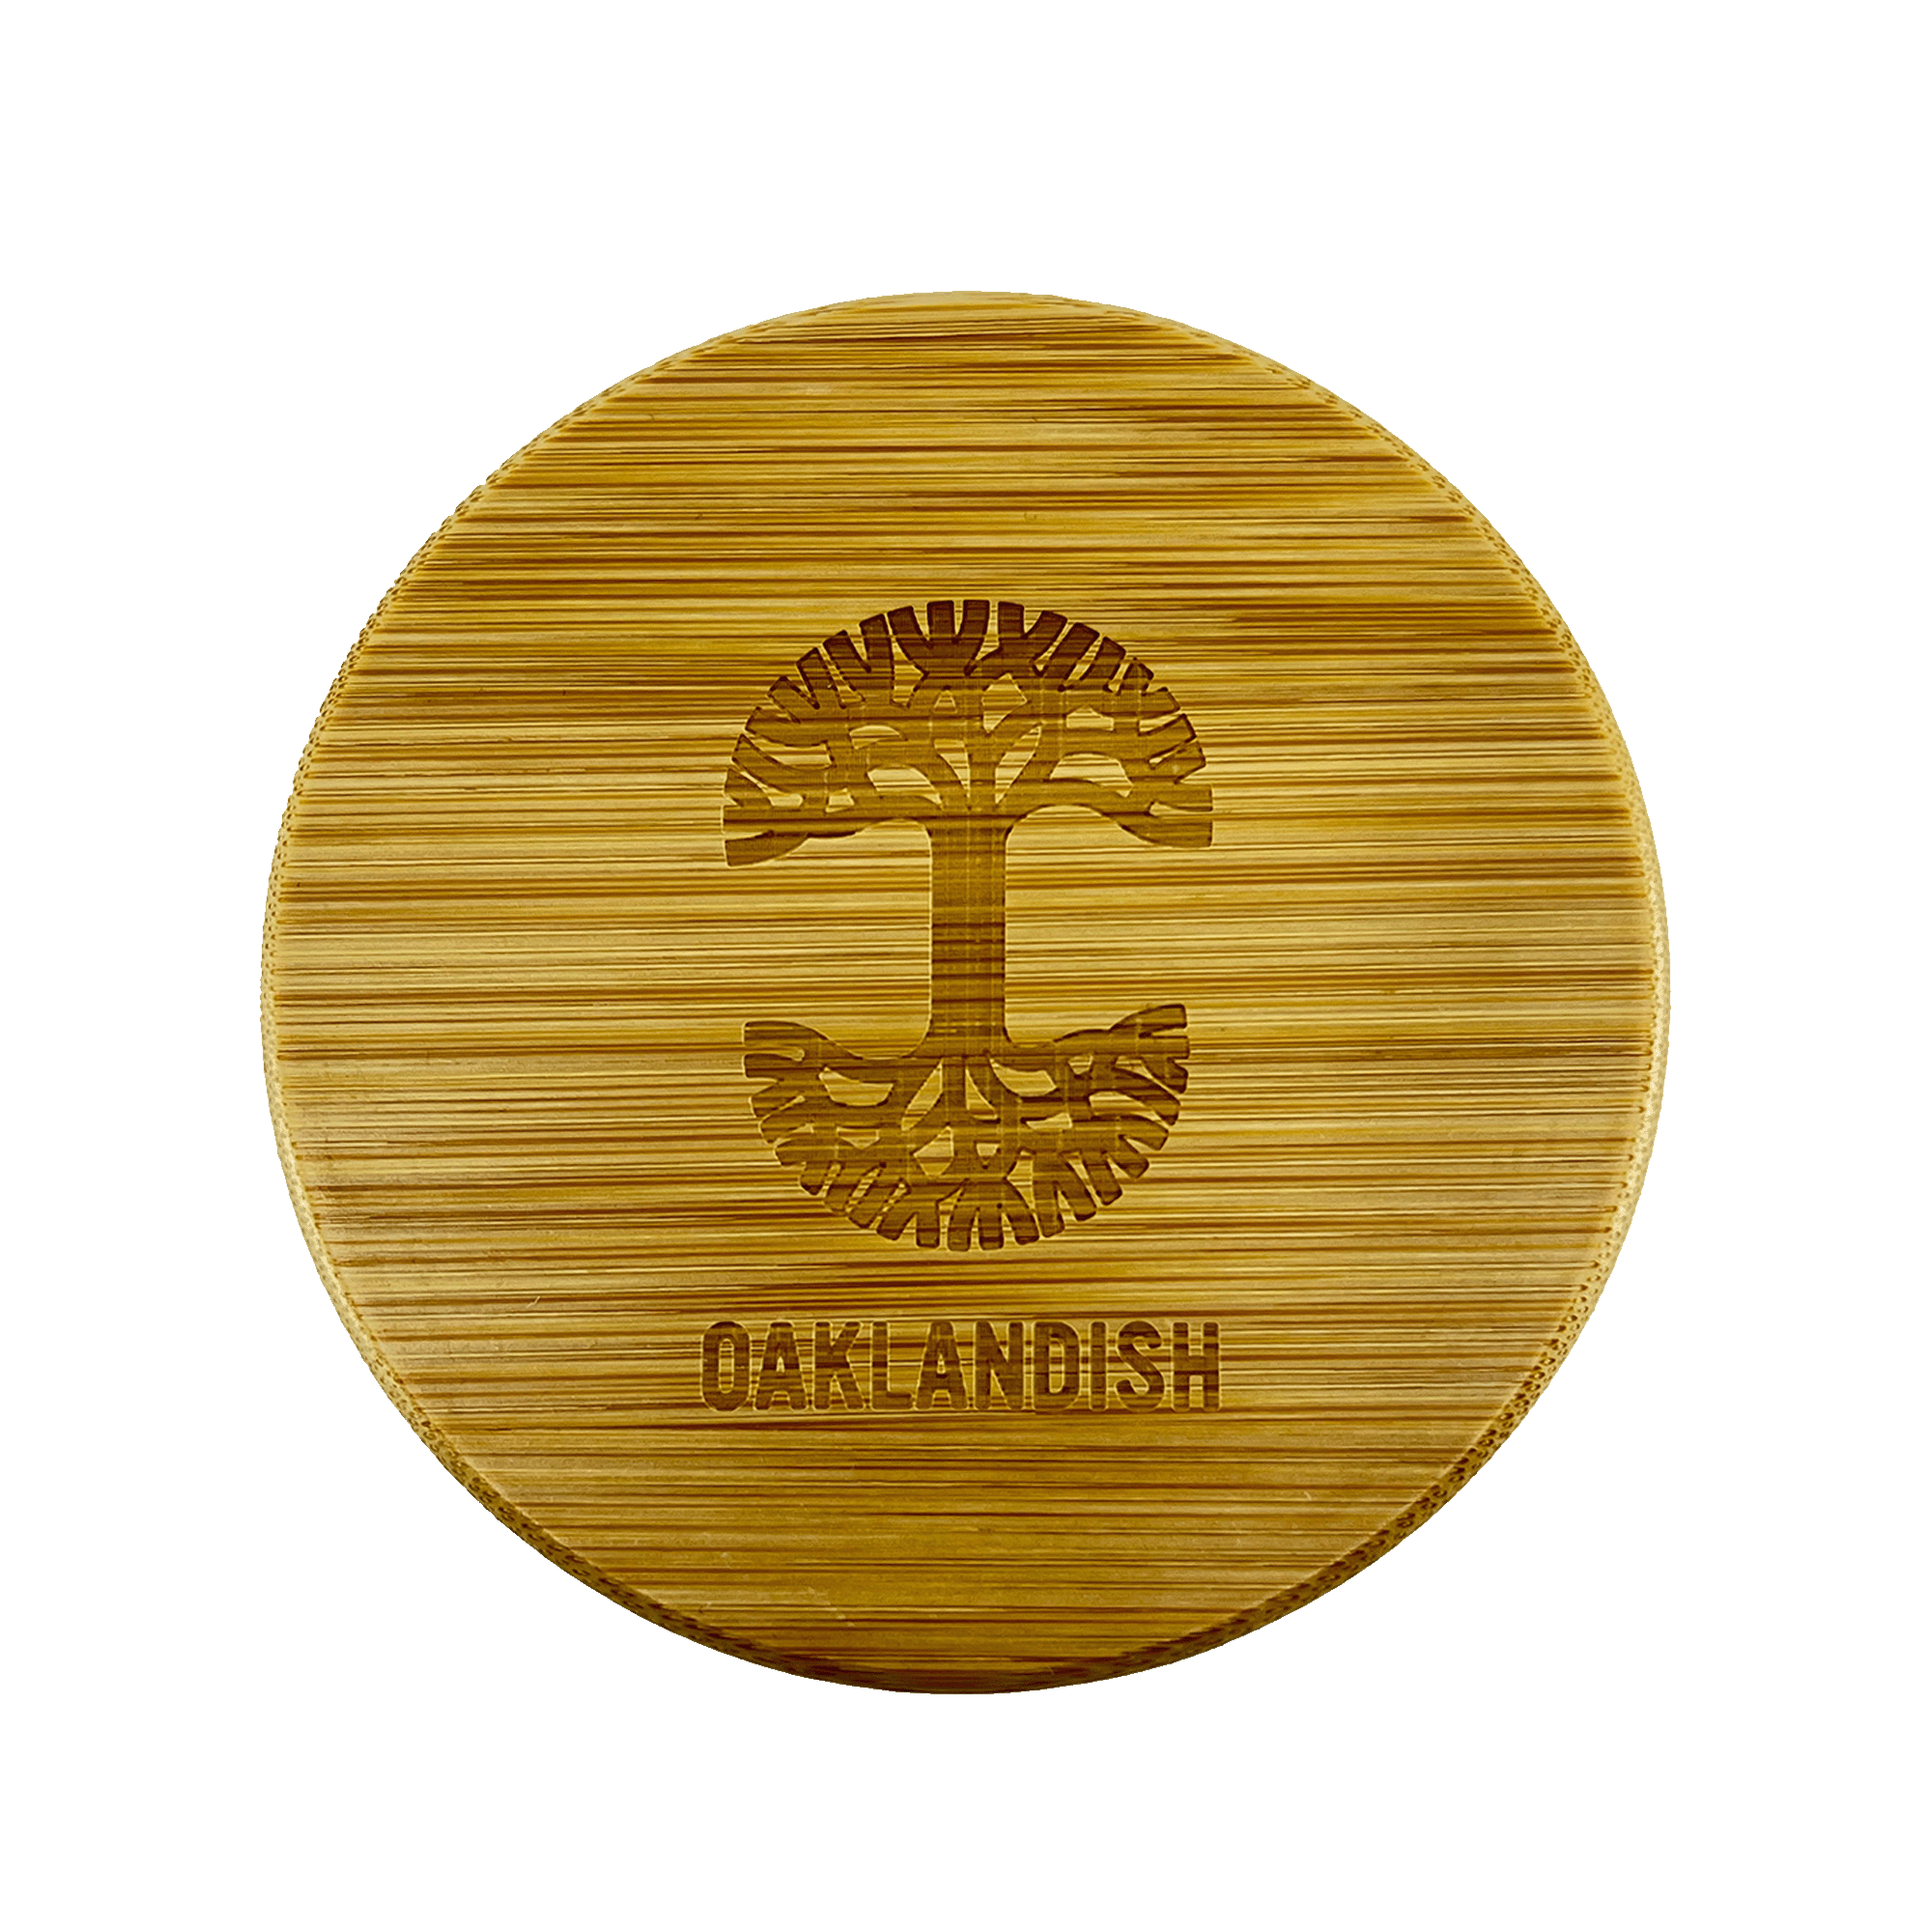 Top view of the bamboo lid for an Oklandish camp mug with laser engraved Oaklandish tree logo and wordmark.